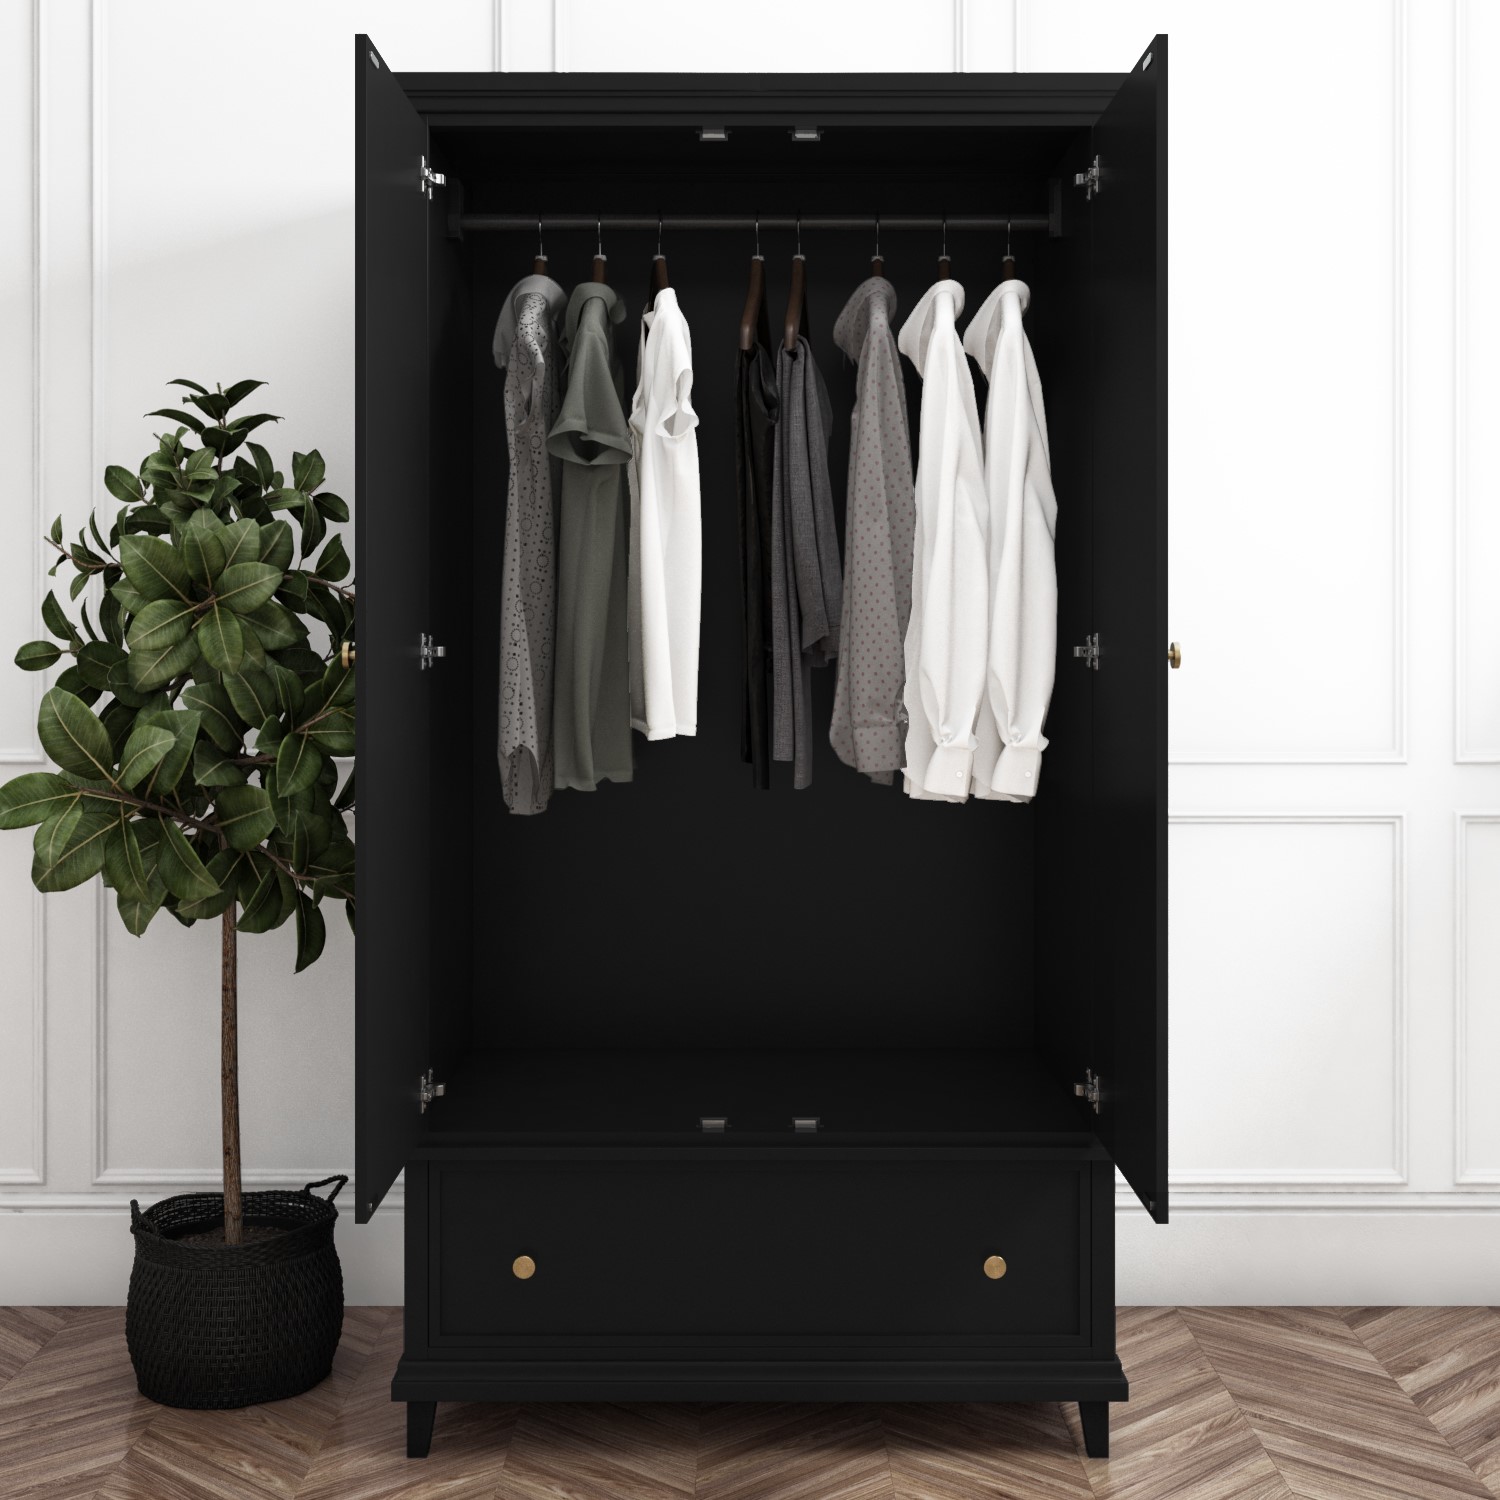 Read more about Black double wardrobe with drawer georgia